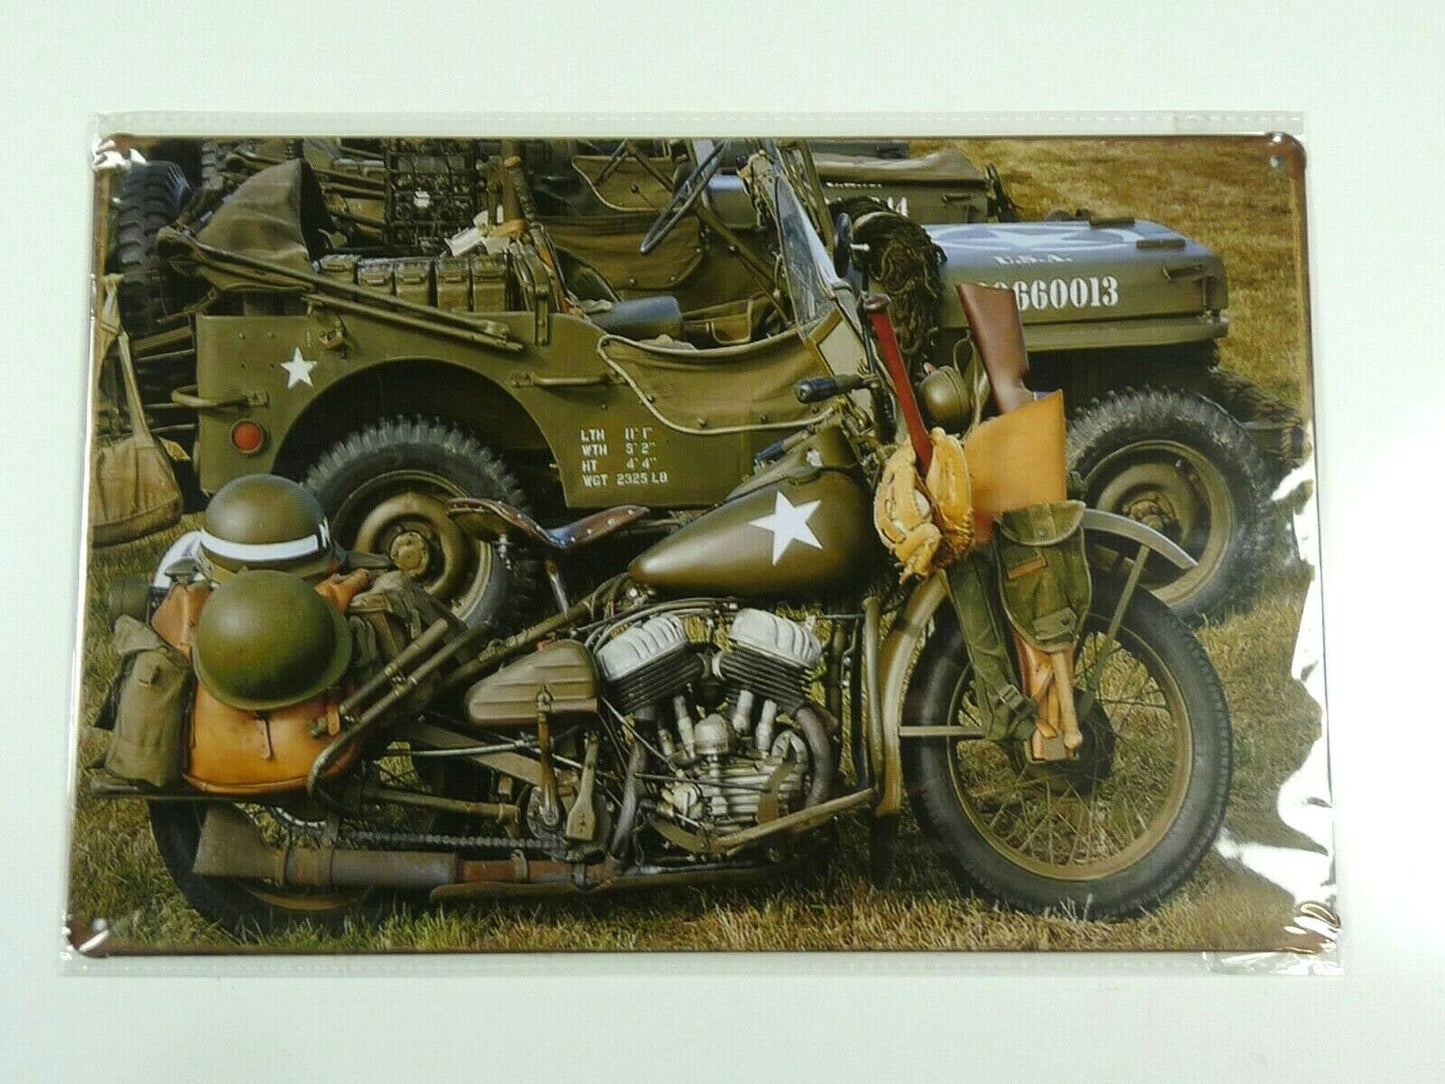 PB74 PLAQUES TOLEE 20 X 30 cm : ARMY MOTORCYCLE